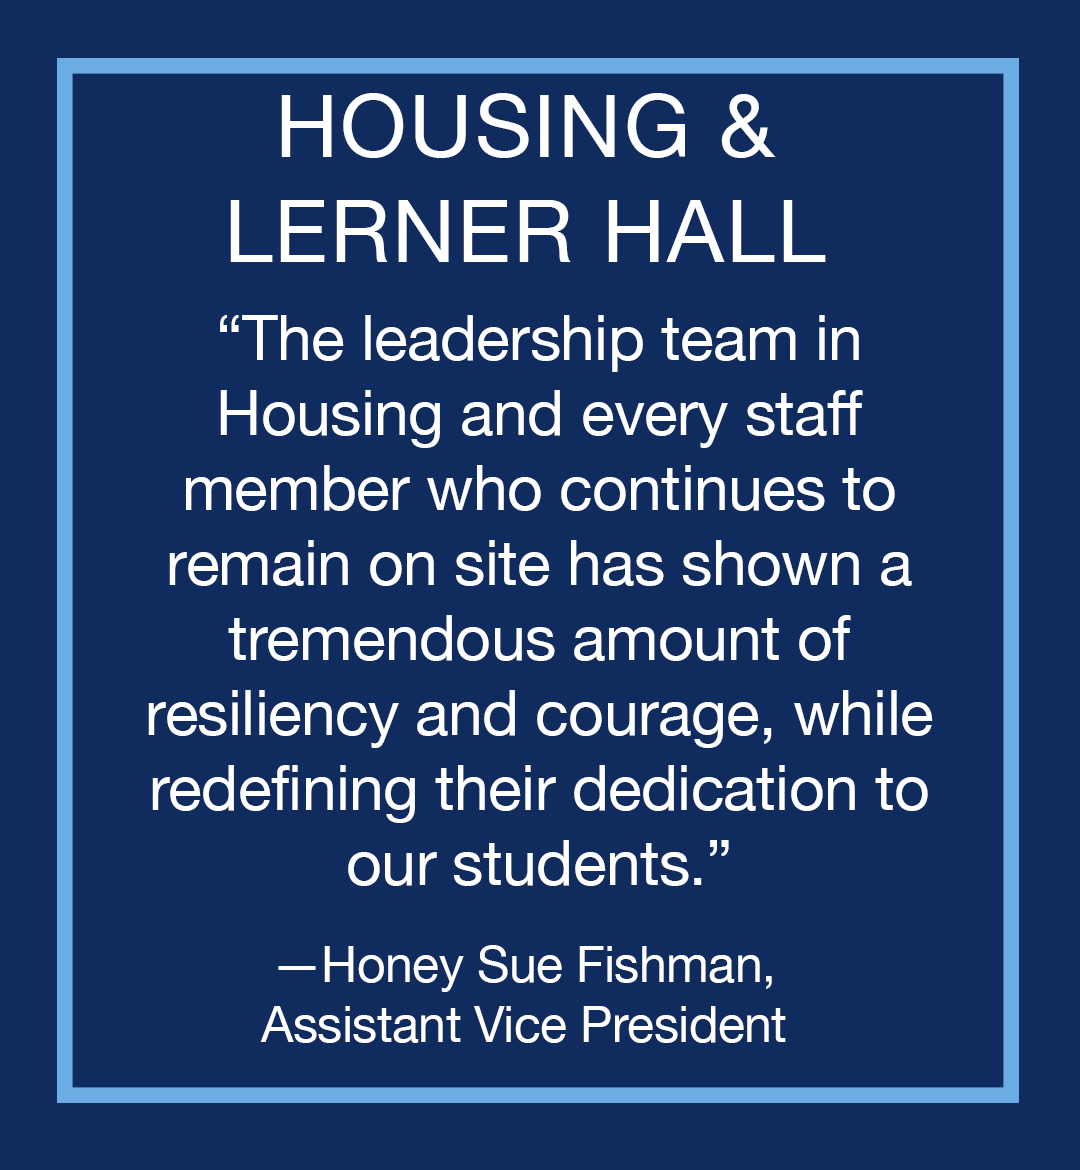 Image with text: Housing & Lerner Hall, "The leadership team in Housing and every staff member who continues to remain on site has shown a tremendous amount of resiliency and courage, while redefining their dedication to our students," Honey Sue Fishman, Assistant Vice President